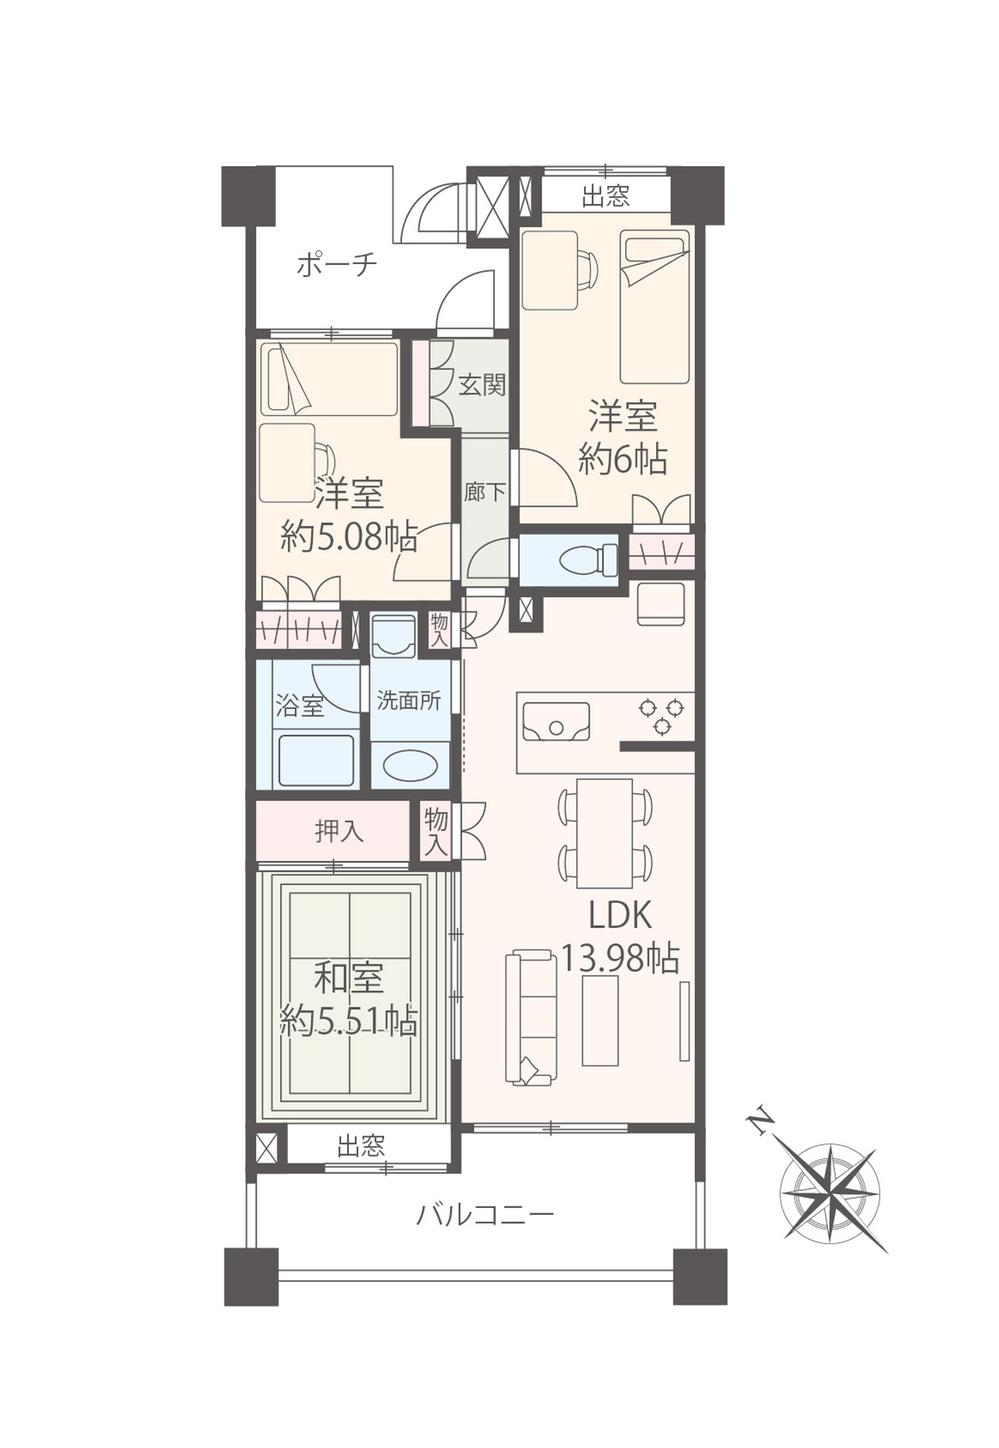 Floor plan. 3LDK, Price 27,800,000 yen, Occupied area 64.24 sq m , Balcony area 10.8 sq m southwest of the bright rooms. It is your very beautiful.